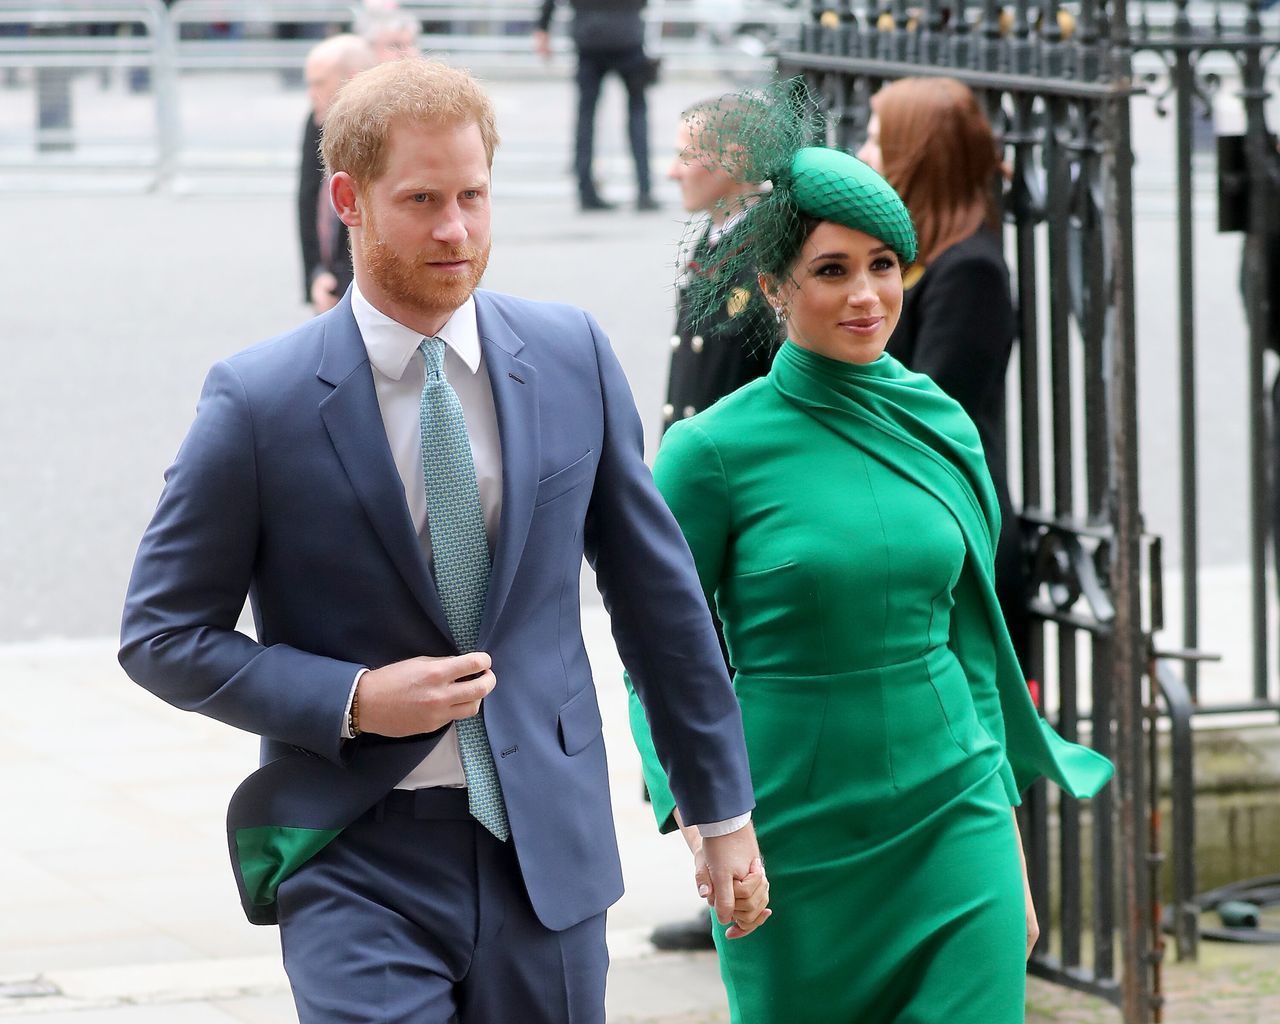 Prince Harry and Meghan, Duchess of Sussex at the Commonwealth Day Service 2020, their last formal public appearance as a royal couple.